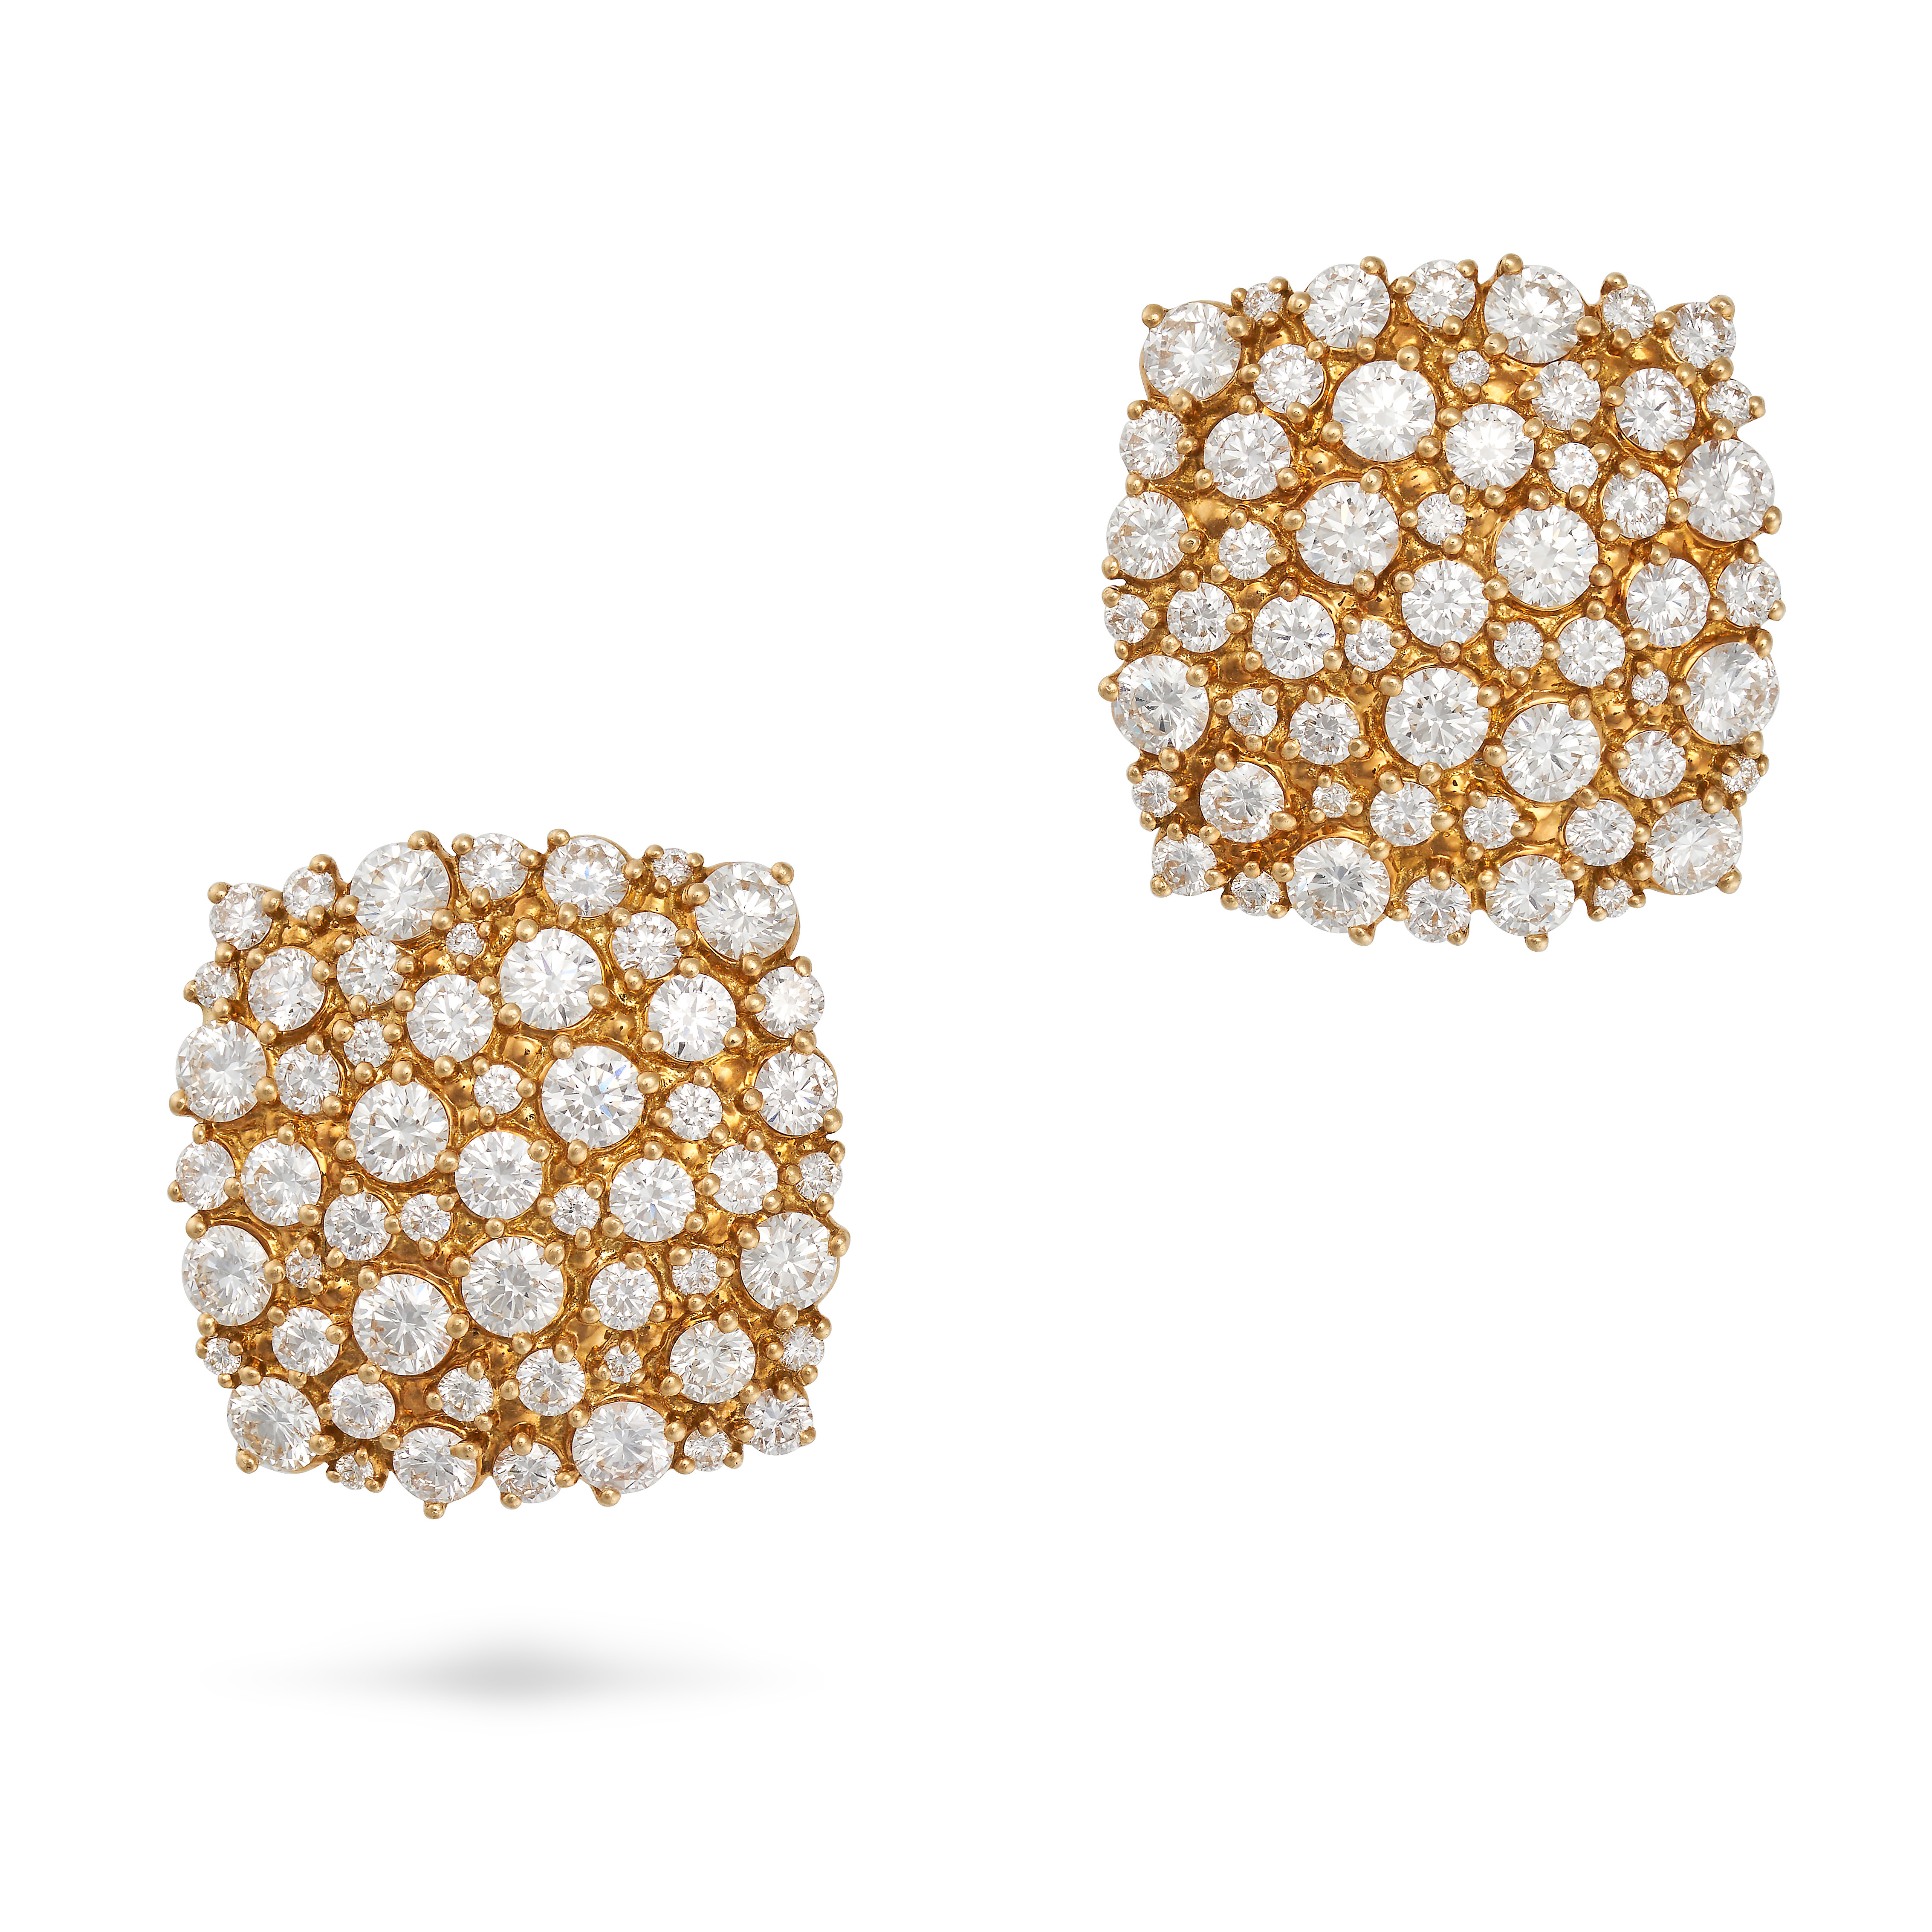 MORELLI, A PAIR OF DIAMOND CLUSTER EARRINGS in 18ct yellow gold, each square shaped earring set w...